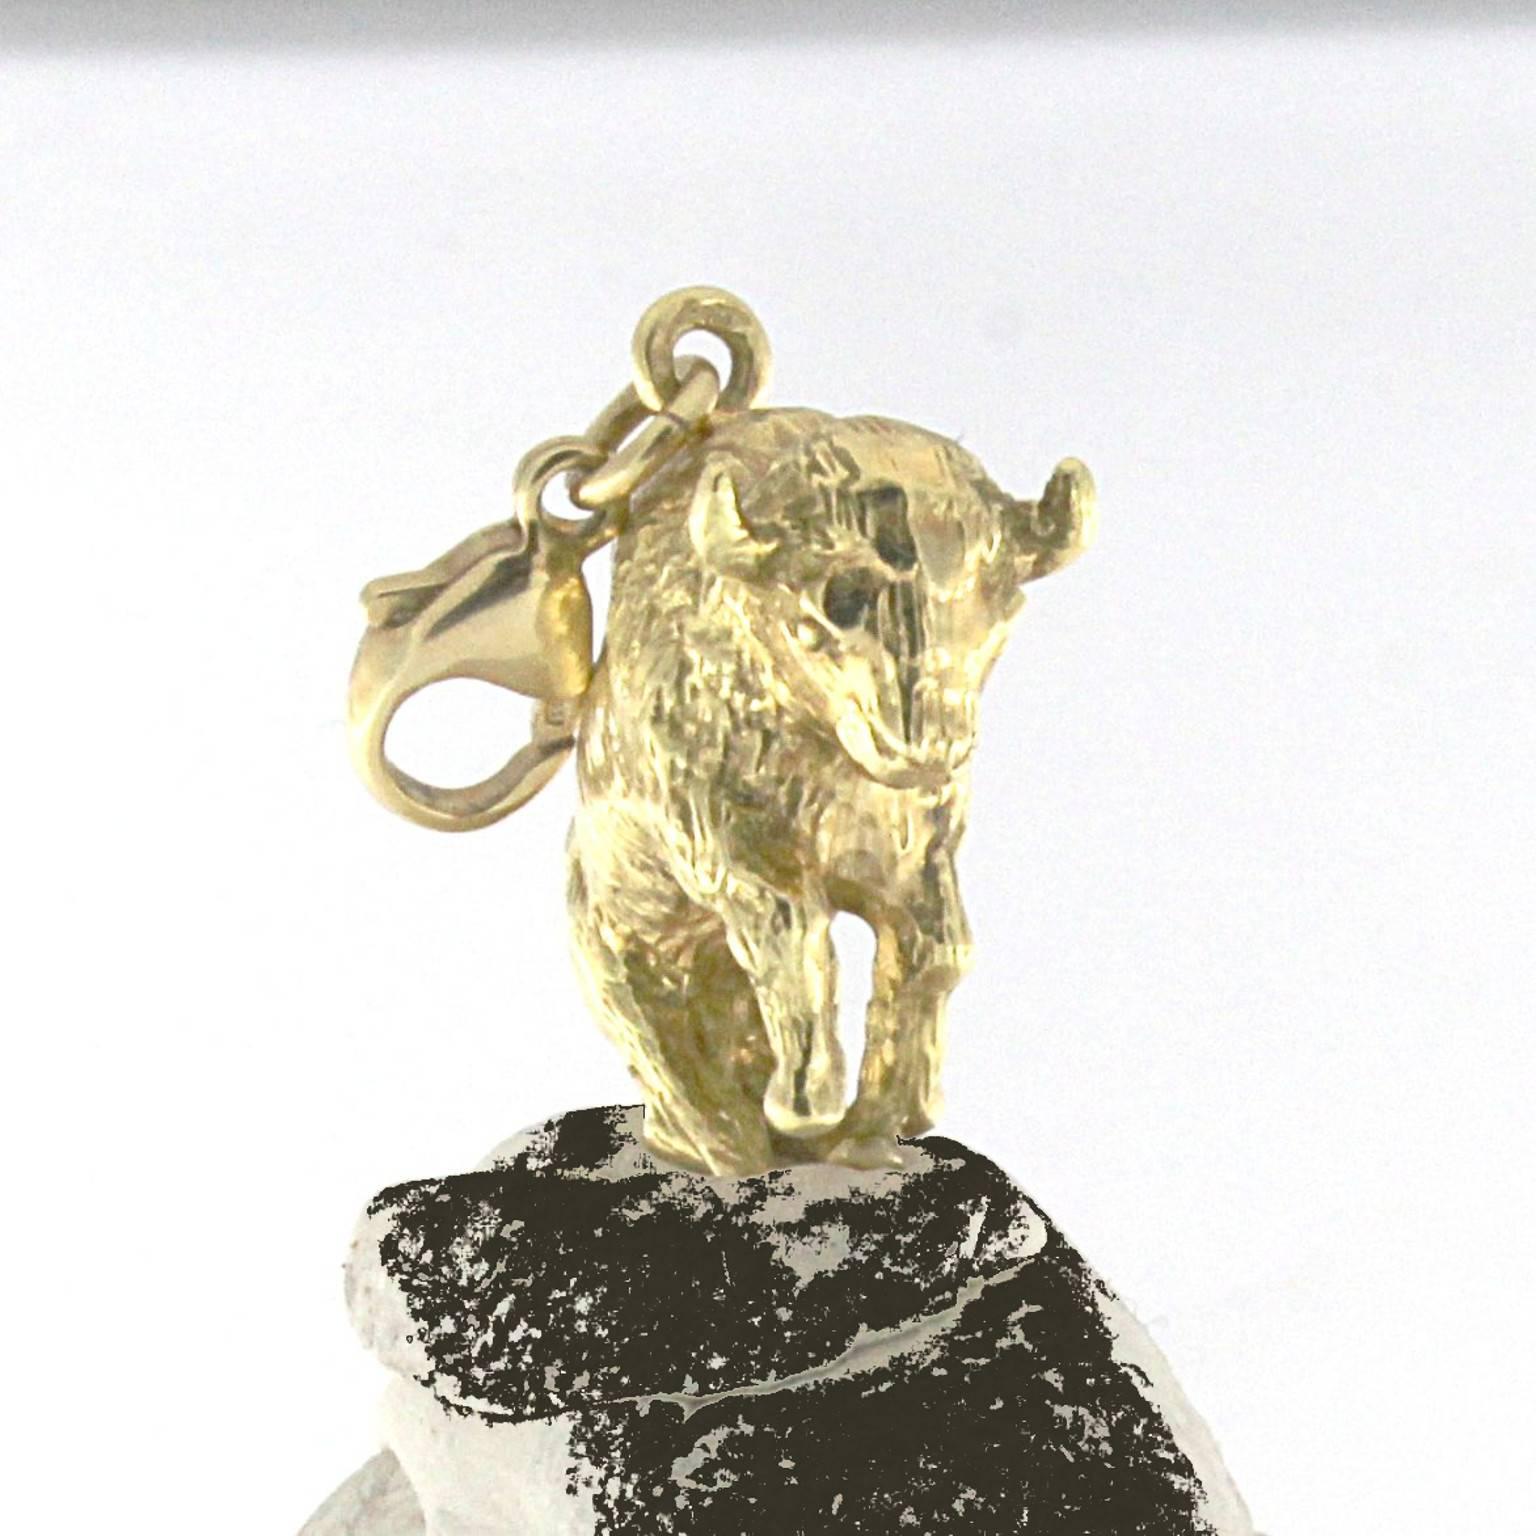 18 kt gold sculptured bufalo
total weight of gold GR 10.00
Stamp 750